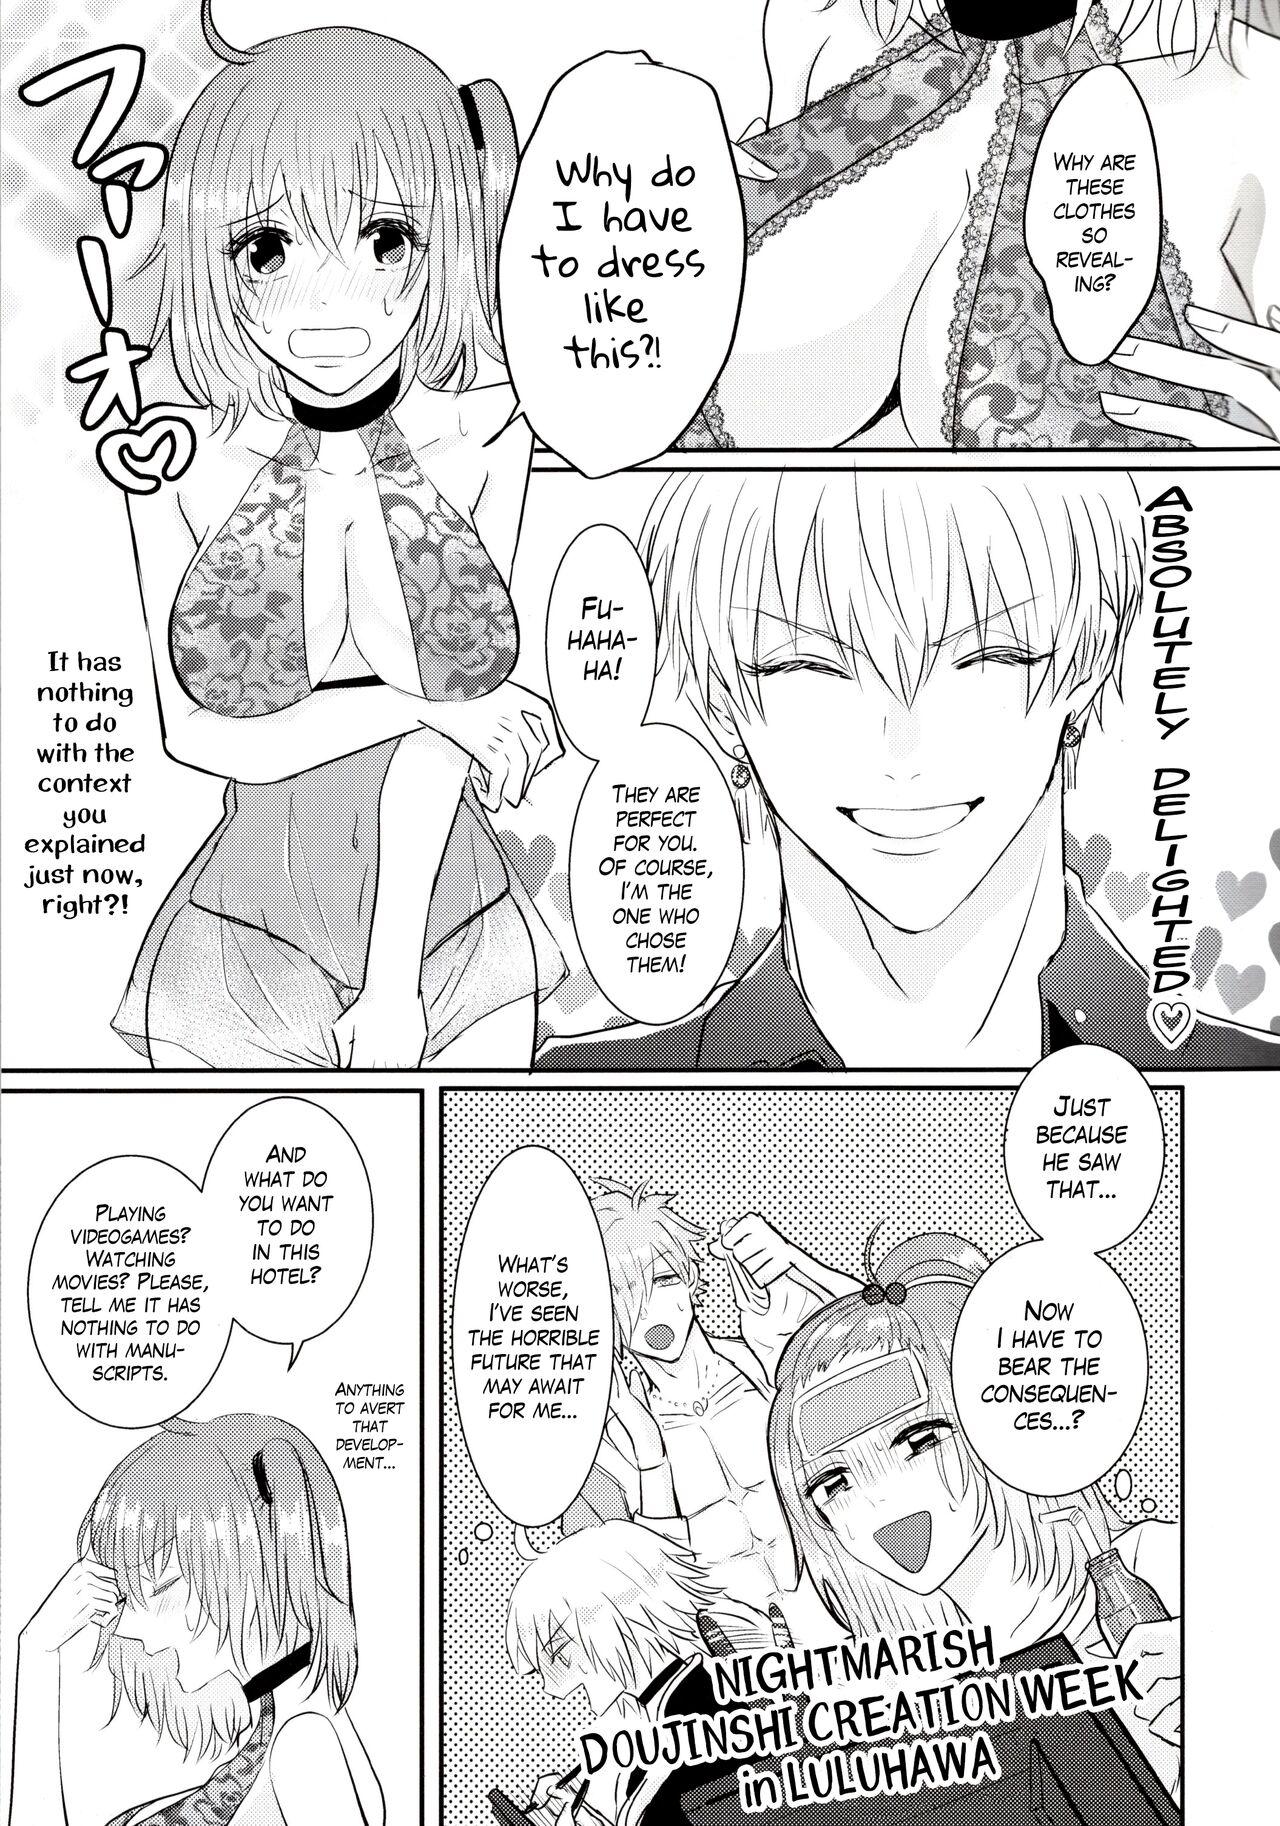 Playing SWEET SEVEN DAYS - Fate grand order Turkish - Page 4